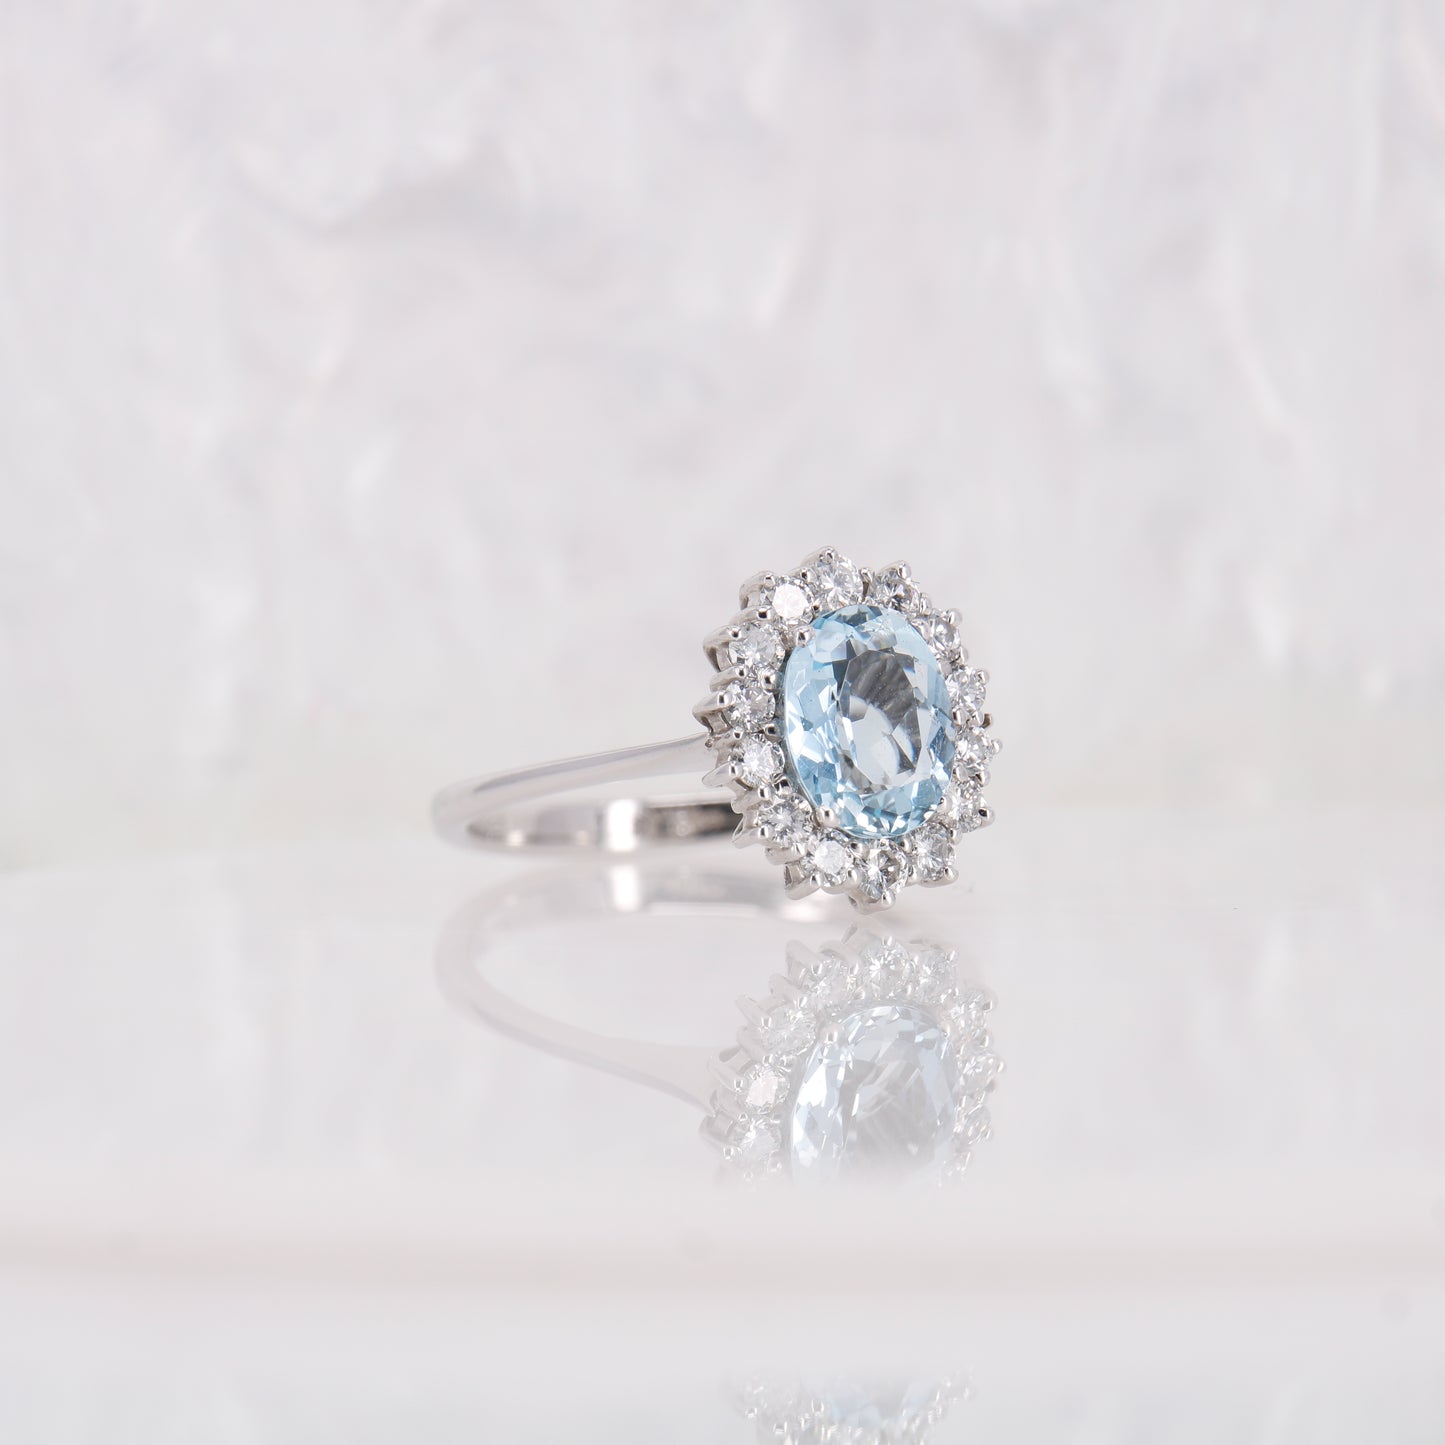 Vintage Secondhand Aquamarine and Diamond Engagement Ring 18ct white gold oval cut aquamarine with a halo of diamonds